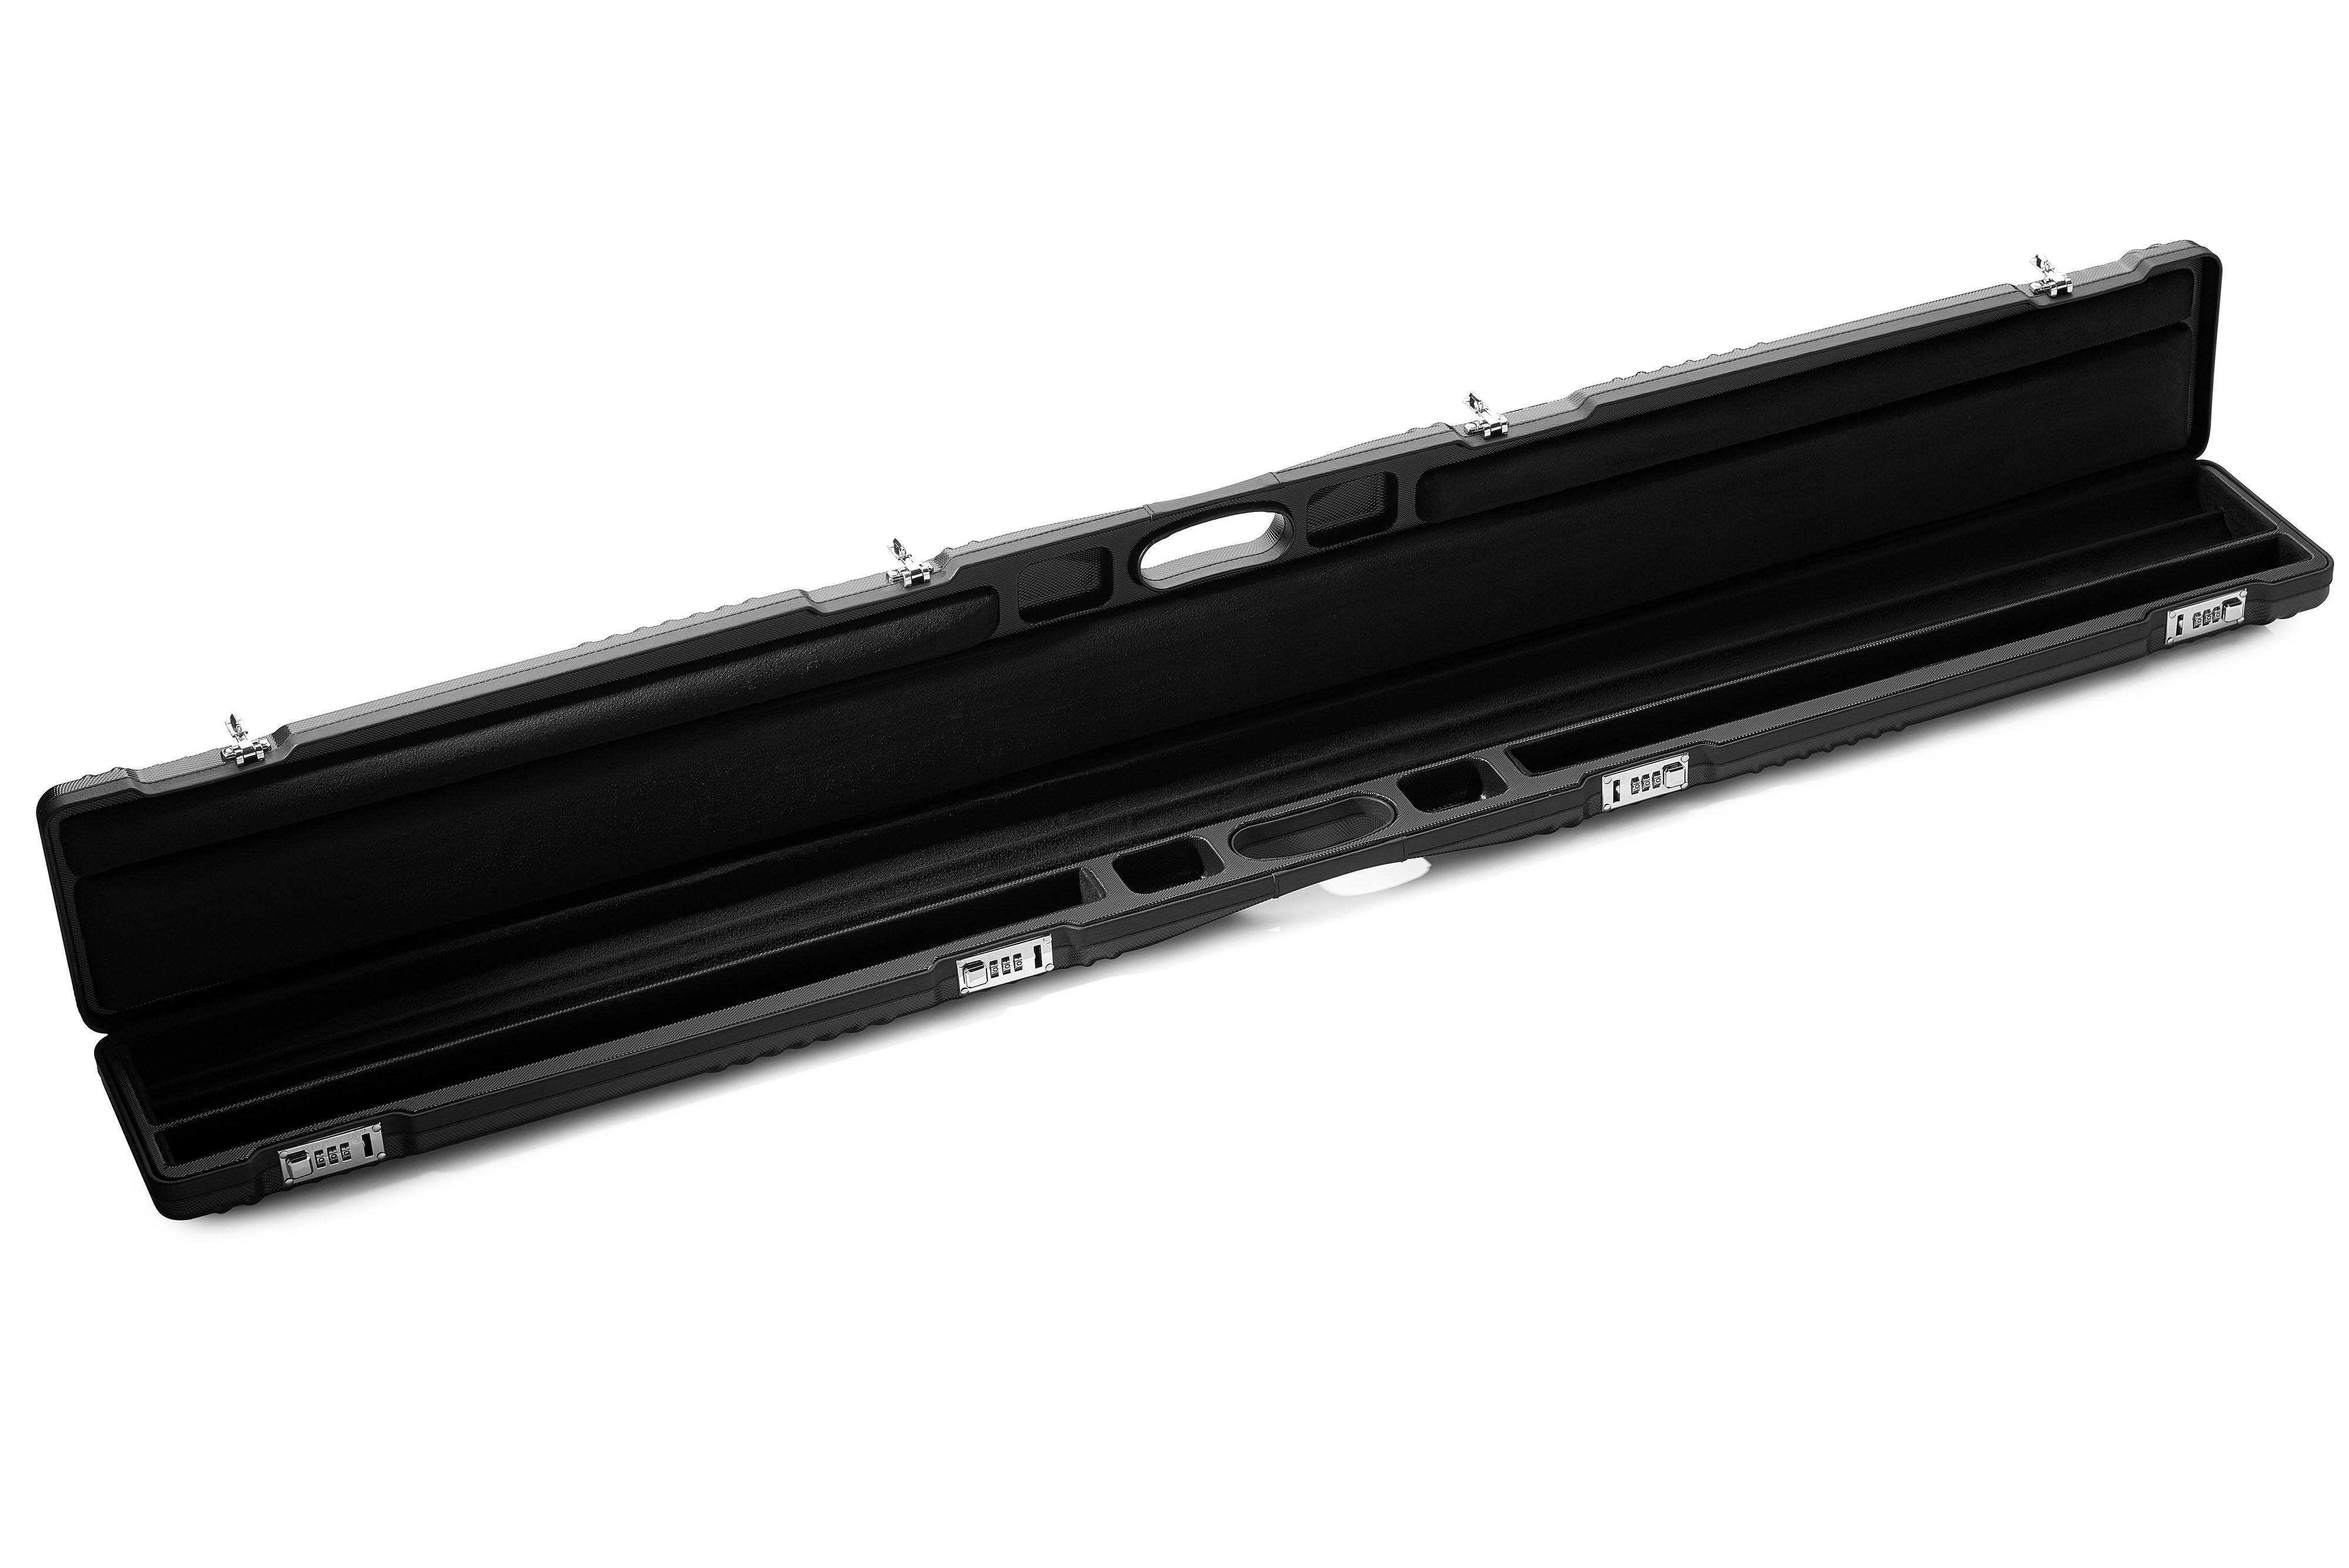 One Piece Beast Cue Case | Free Delivery!